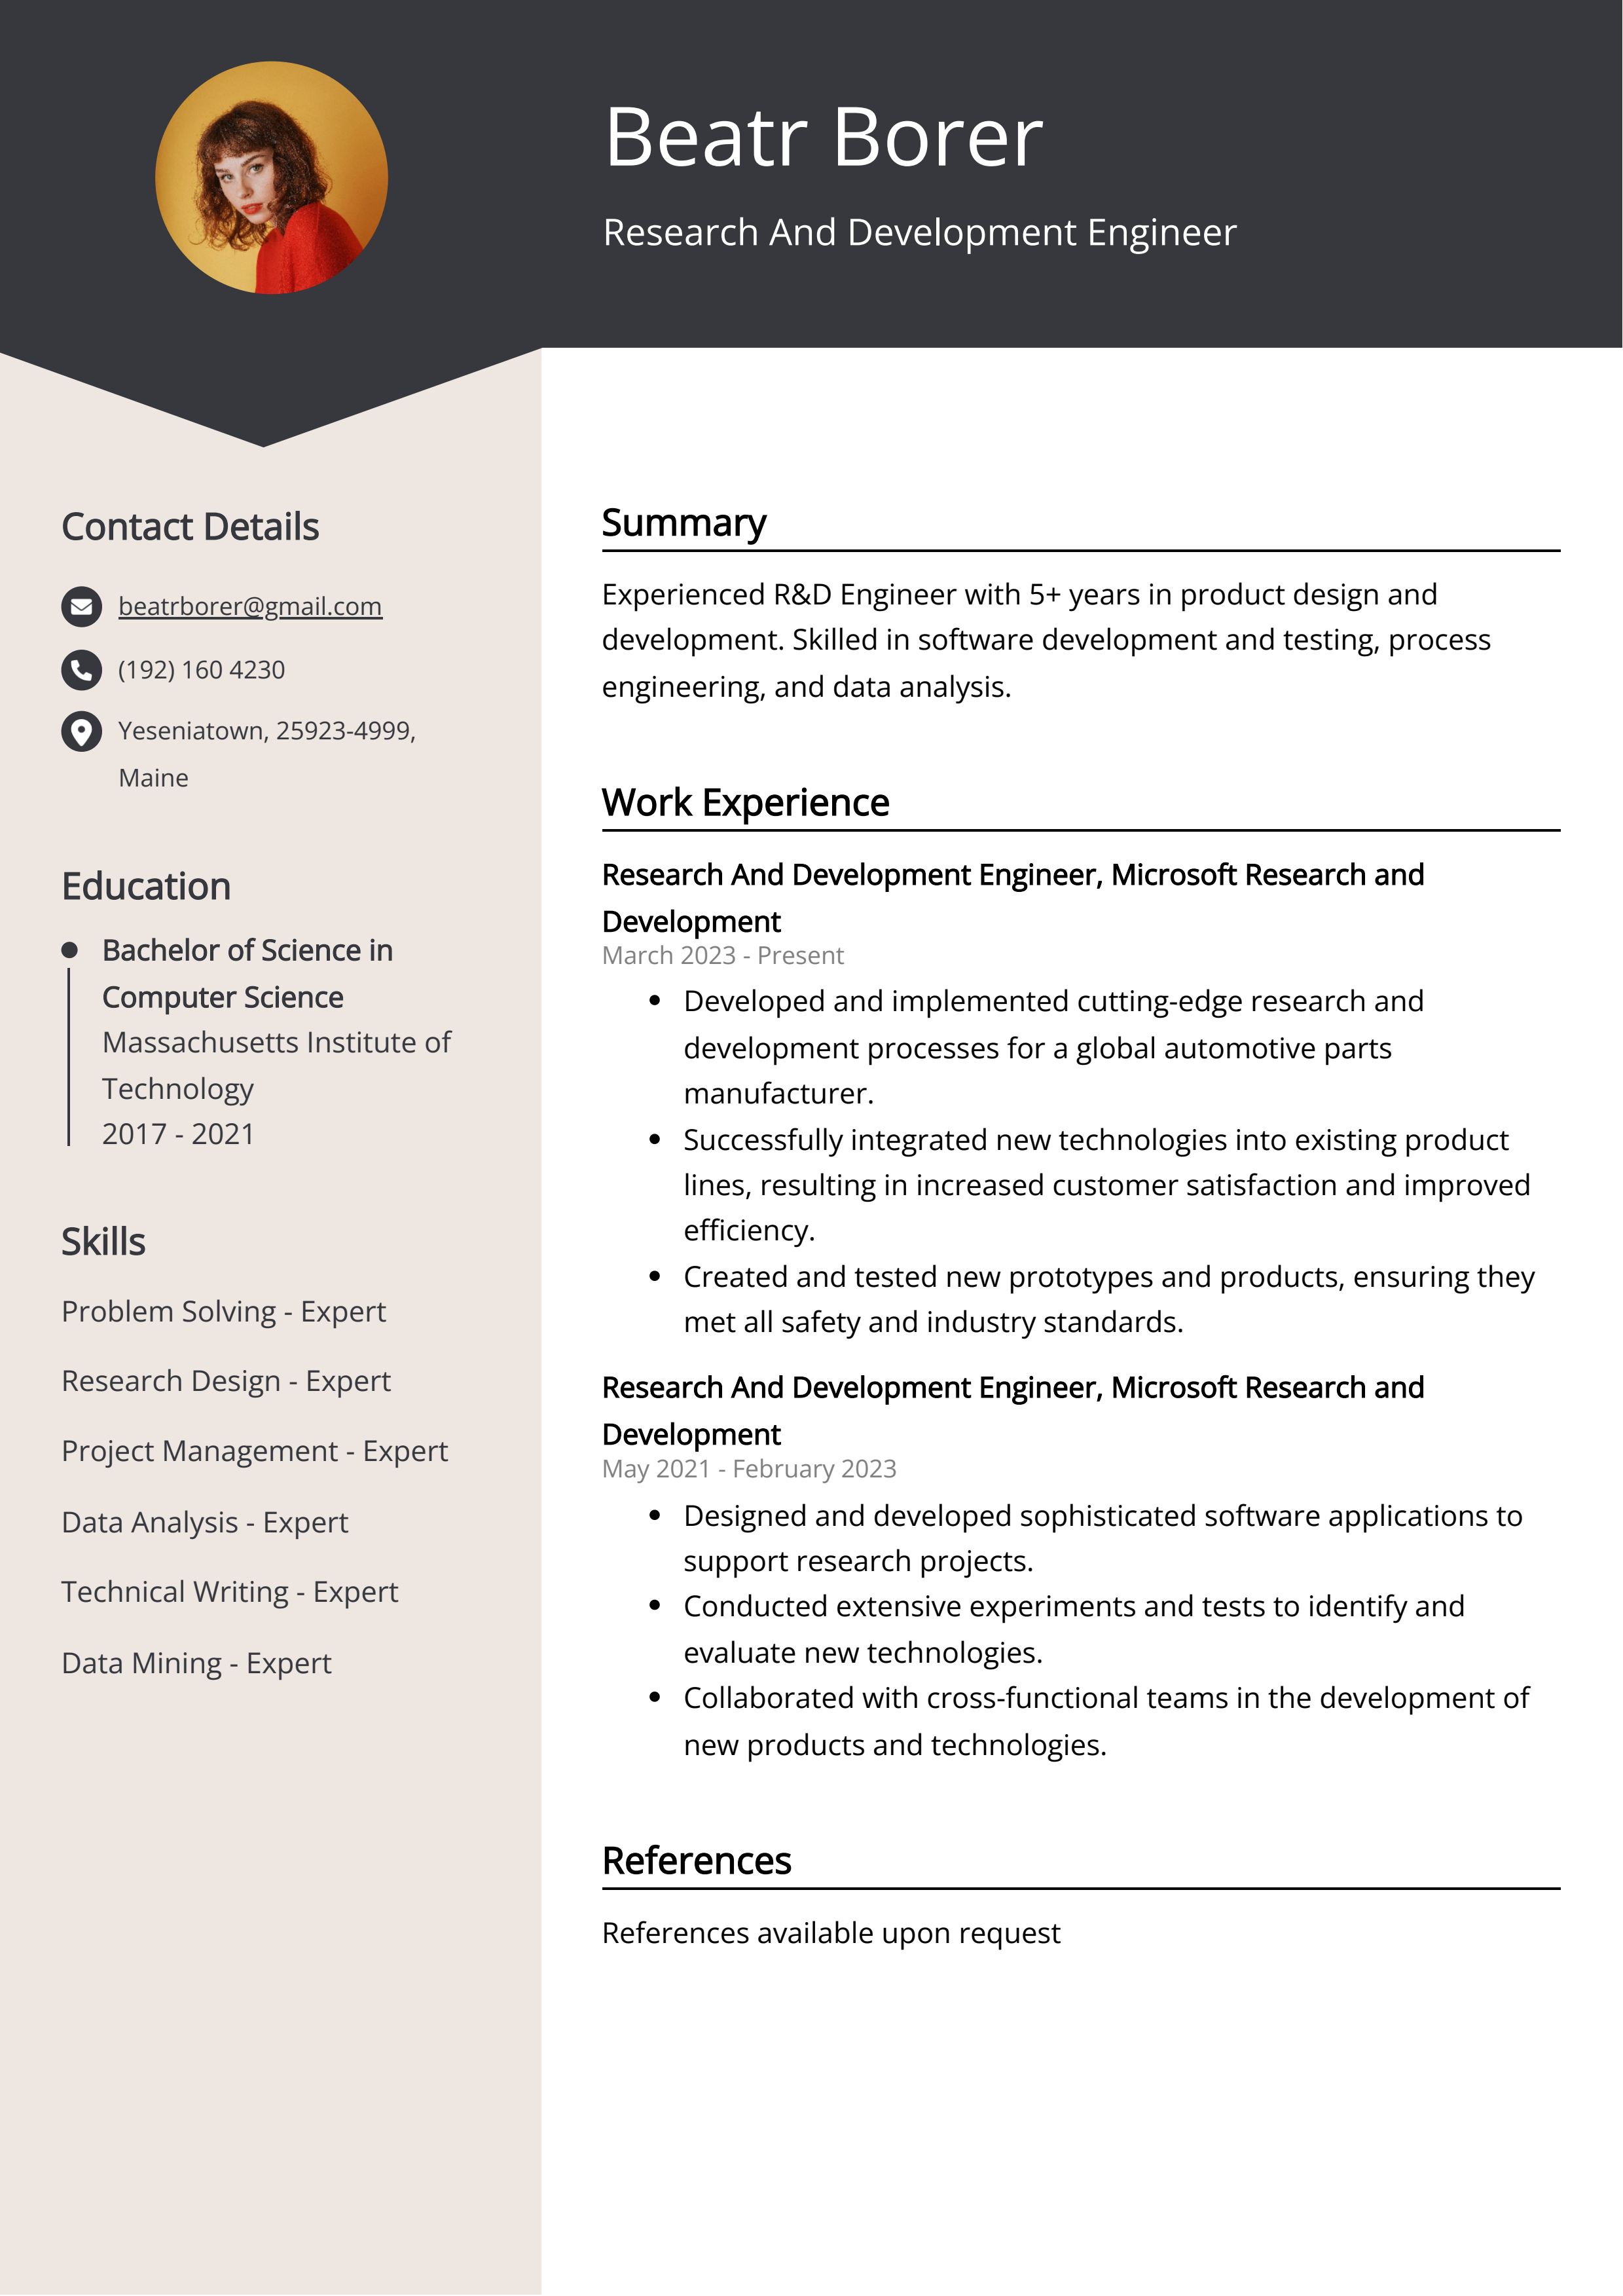 Research And Development Engineer Resume Example